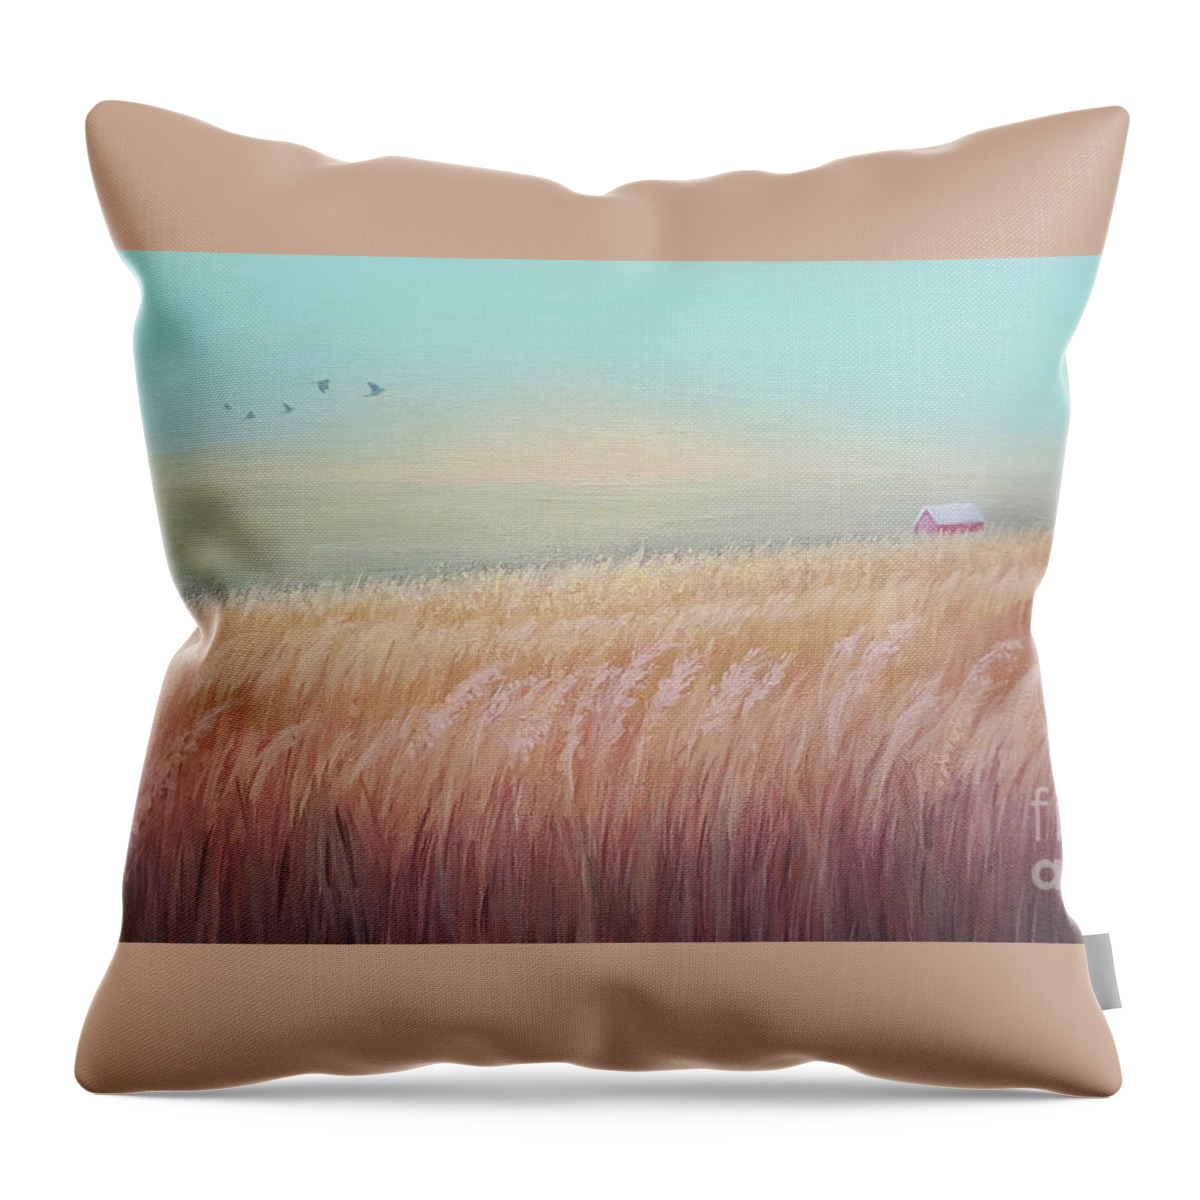 Harvest Throw Pillow featuring the painting Harvest Time by Yoonhee Ko